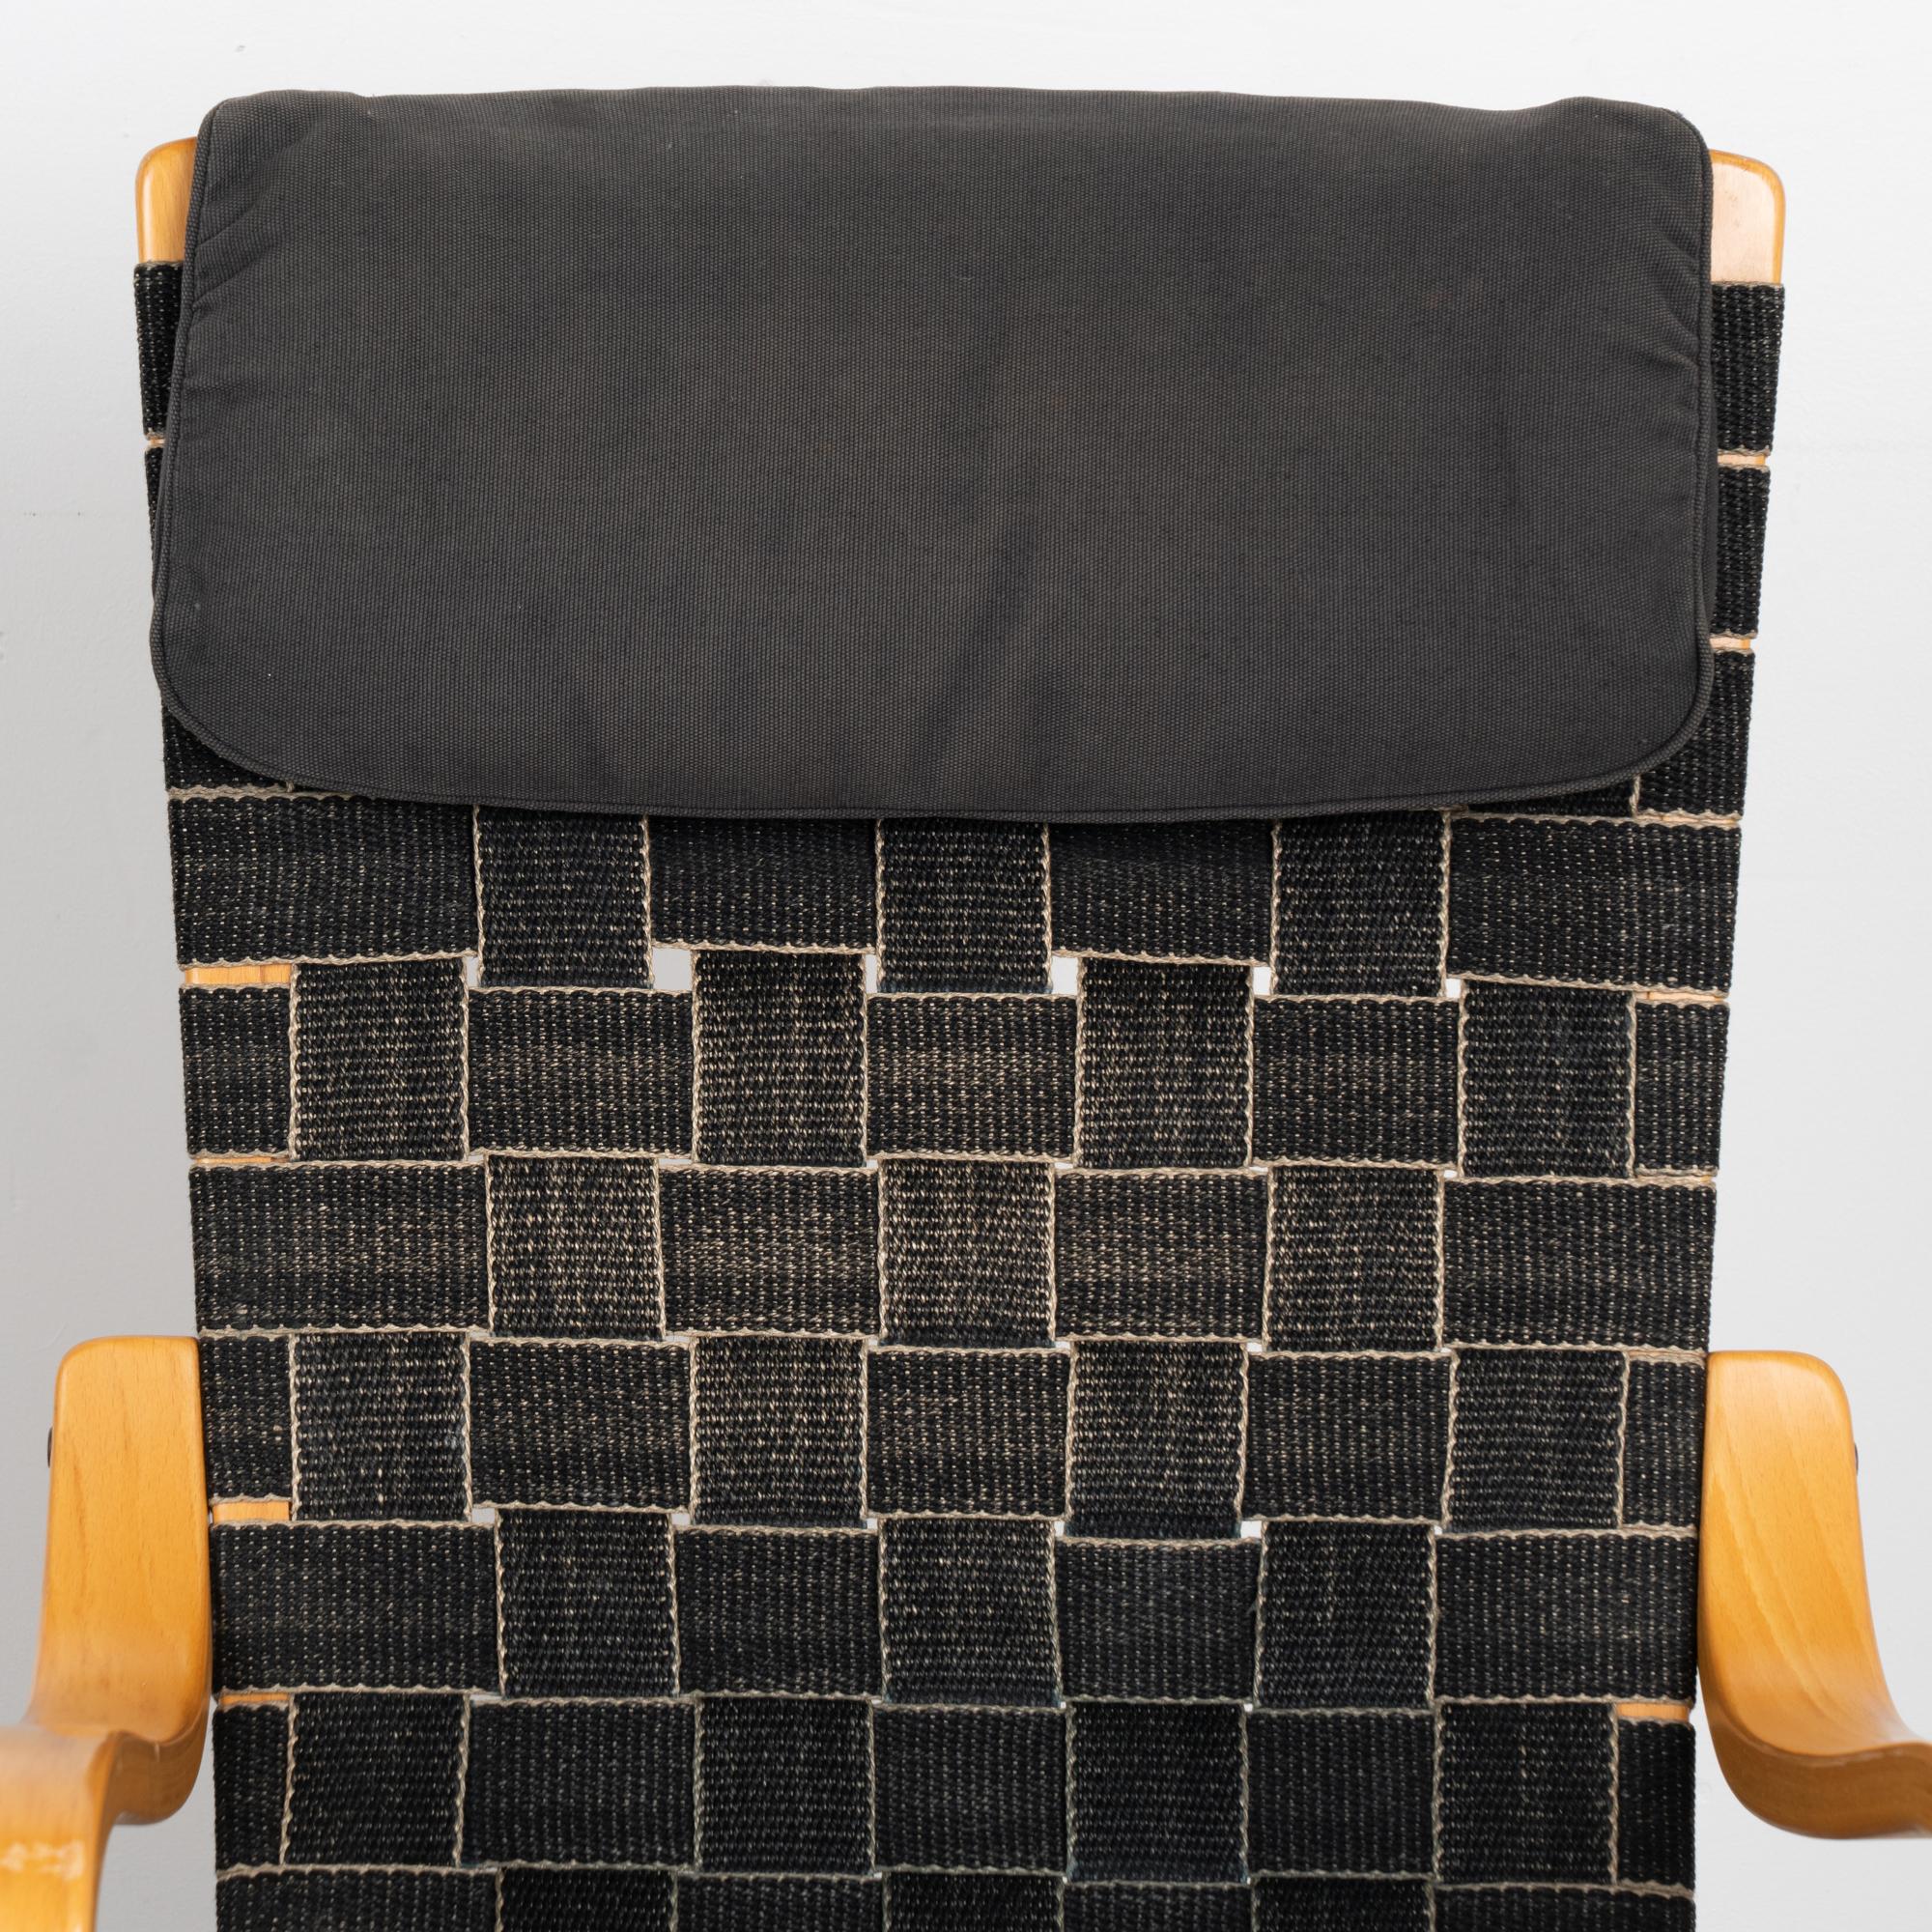 Danish Mid Century Cantilever Lounge Arm Chairs With Black Webbing, Denmark circa 1970